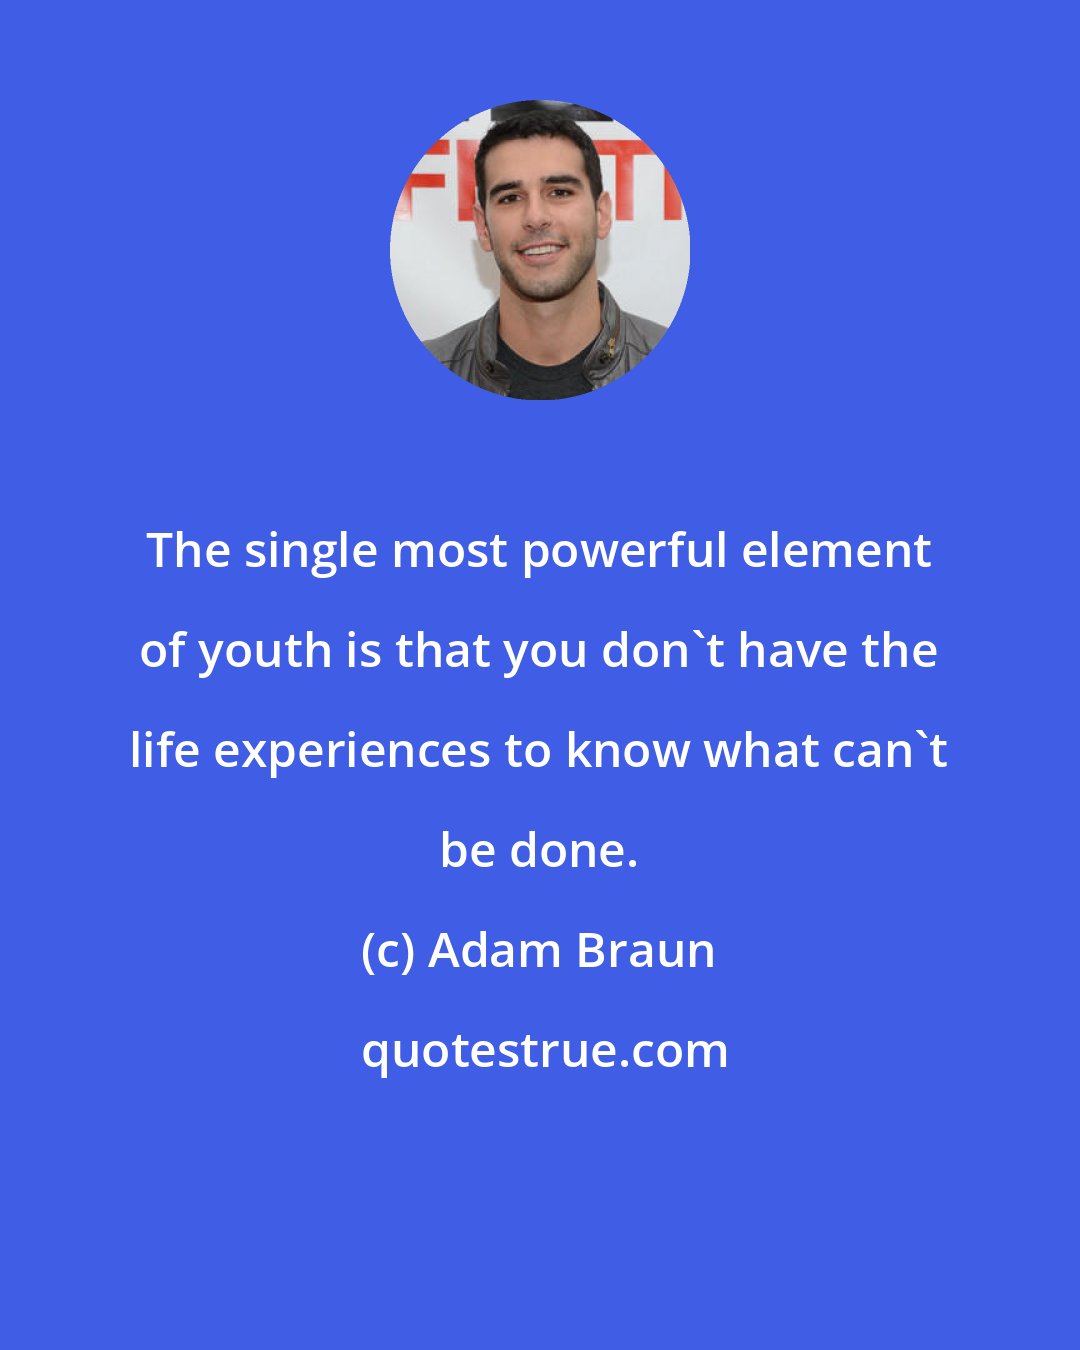 Adam Braun: The single most powerful element of youth is that you don't have the life experiences to know what can't be done.